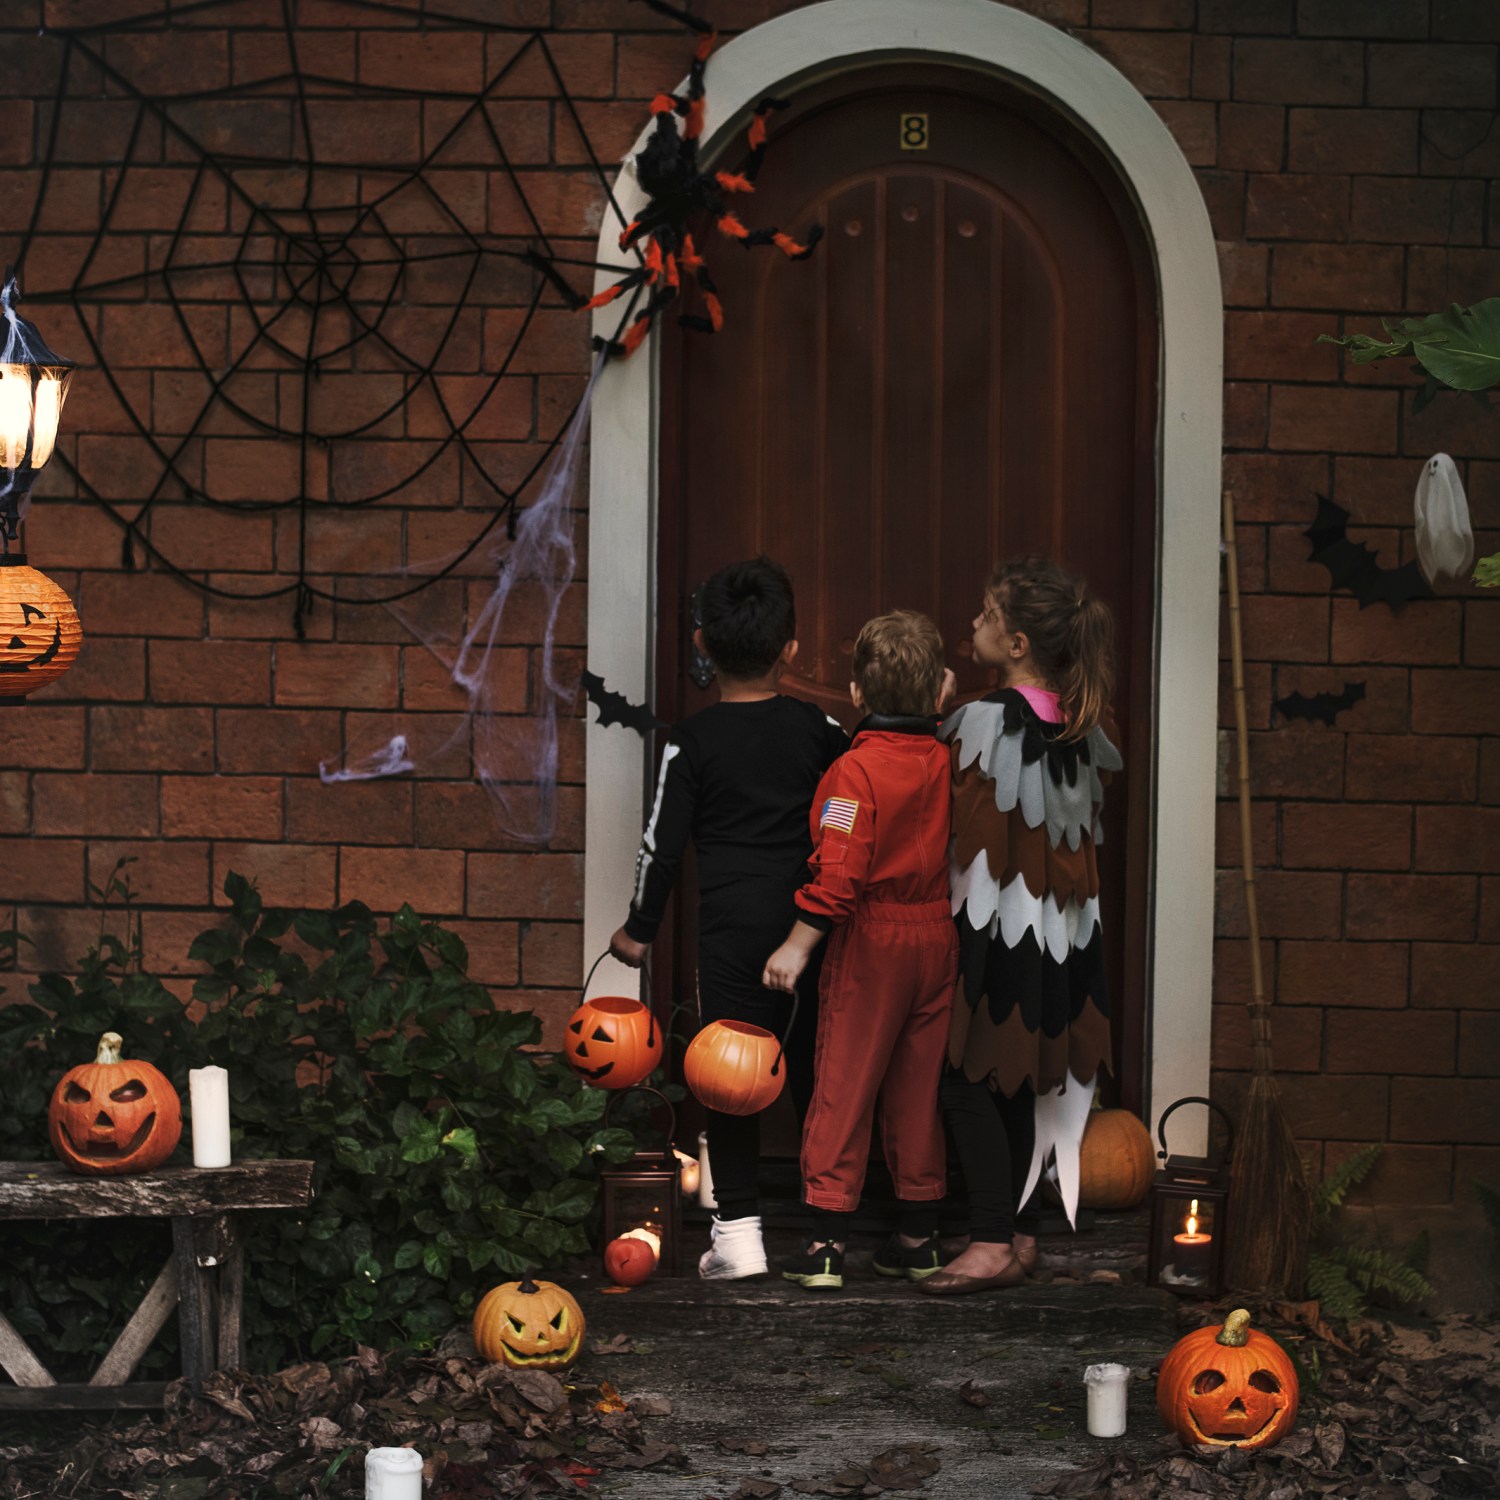 A group of young children at a door, trick or treating on Halloween